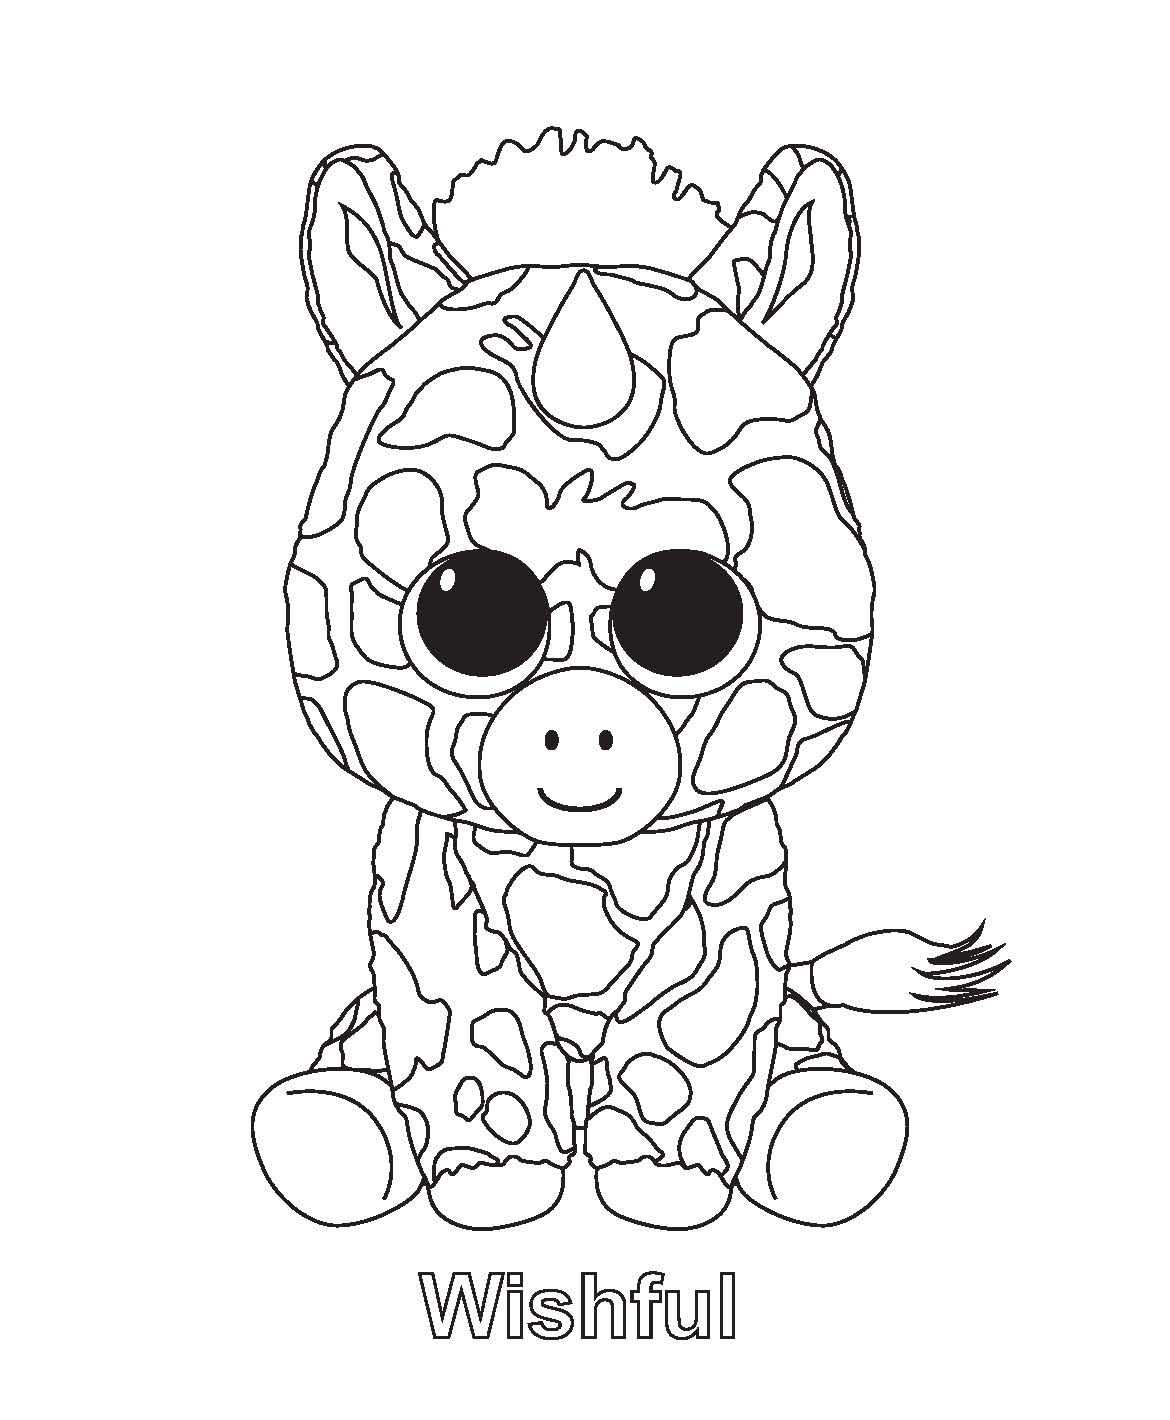 Wishful Beanie Boo Coloring Pages